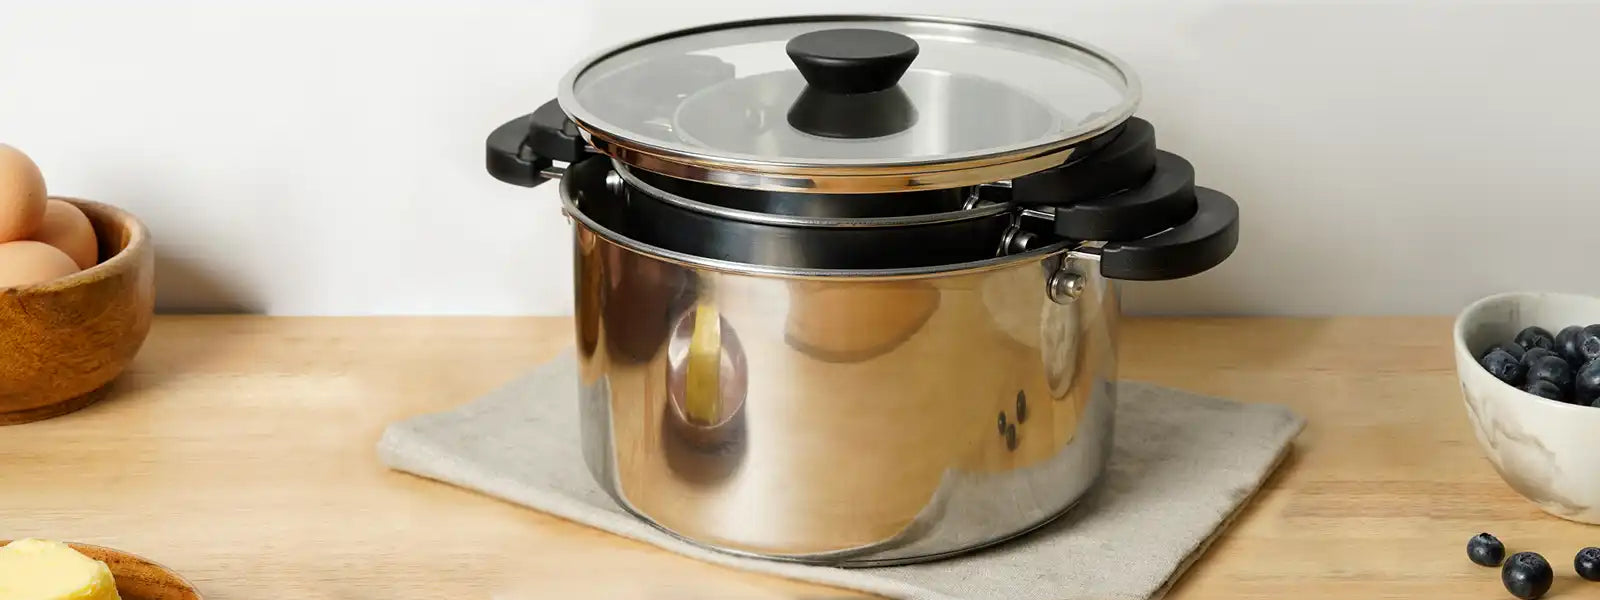 What are the best pots and pans that won't scratch or stain?